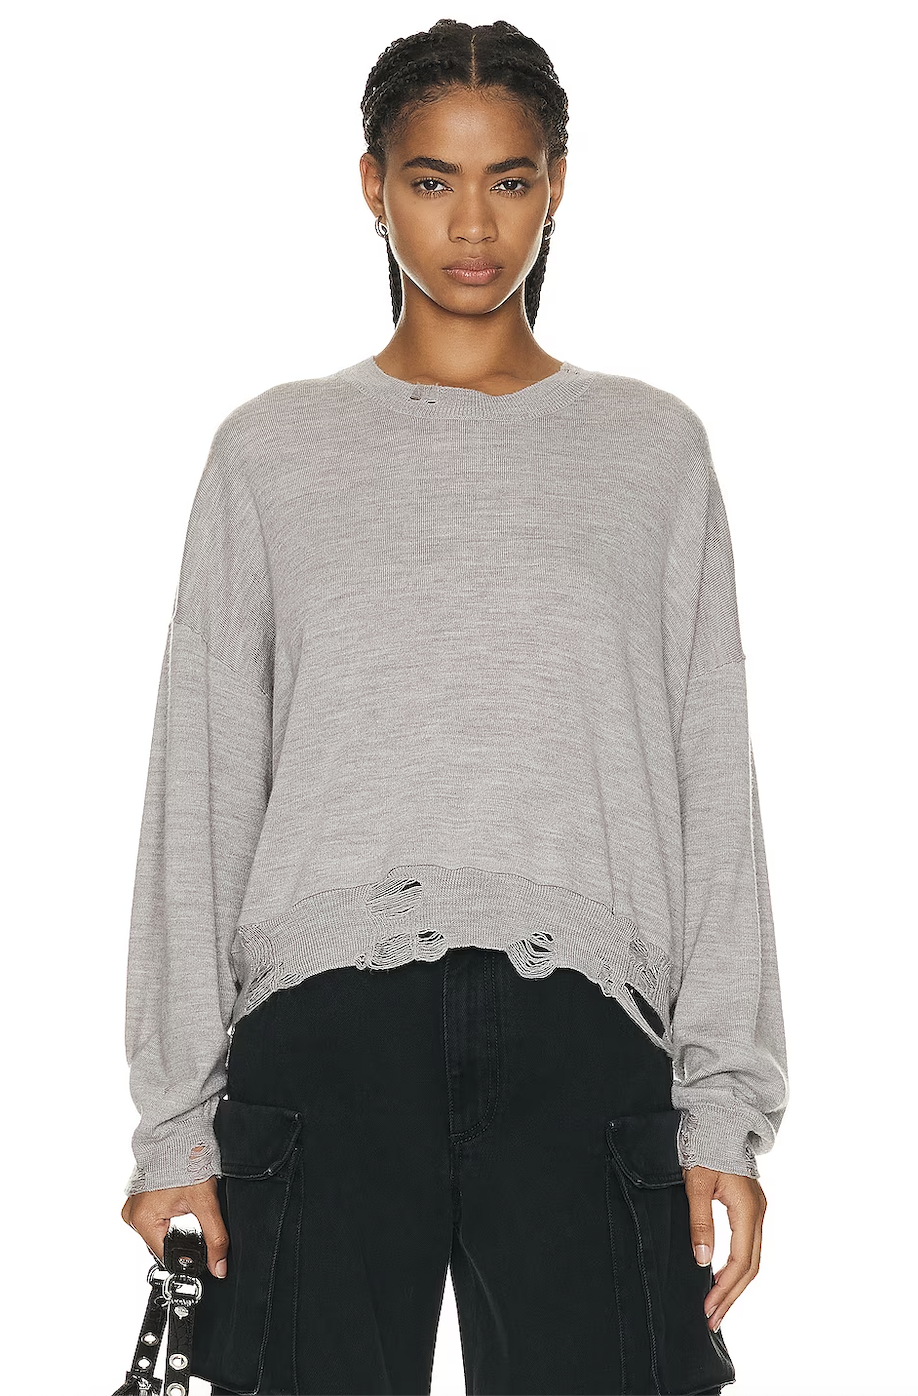 Distressed Merino Wool Pullover, available at west2westport.com